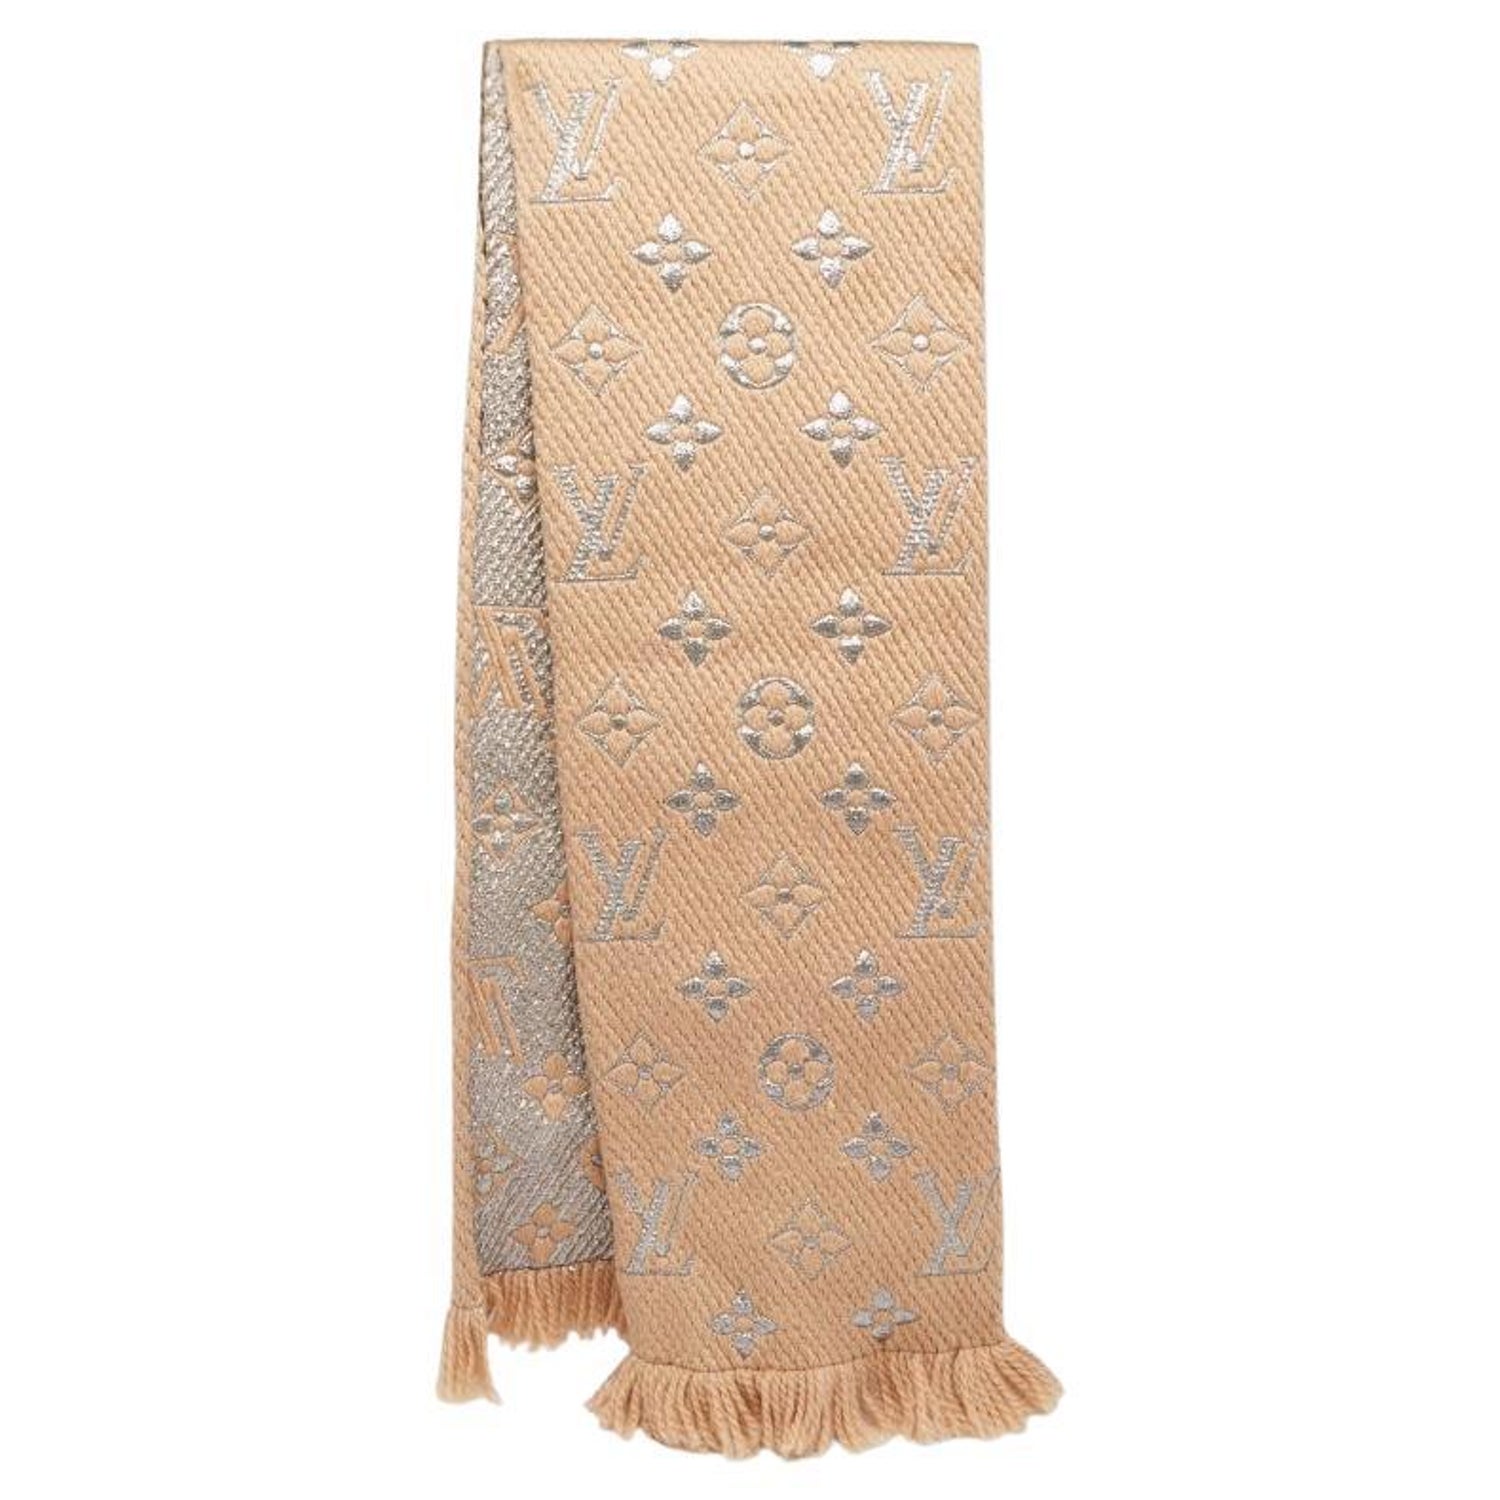 Louis Vuitton Shine Scarf - For Sale on 1stDibs